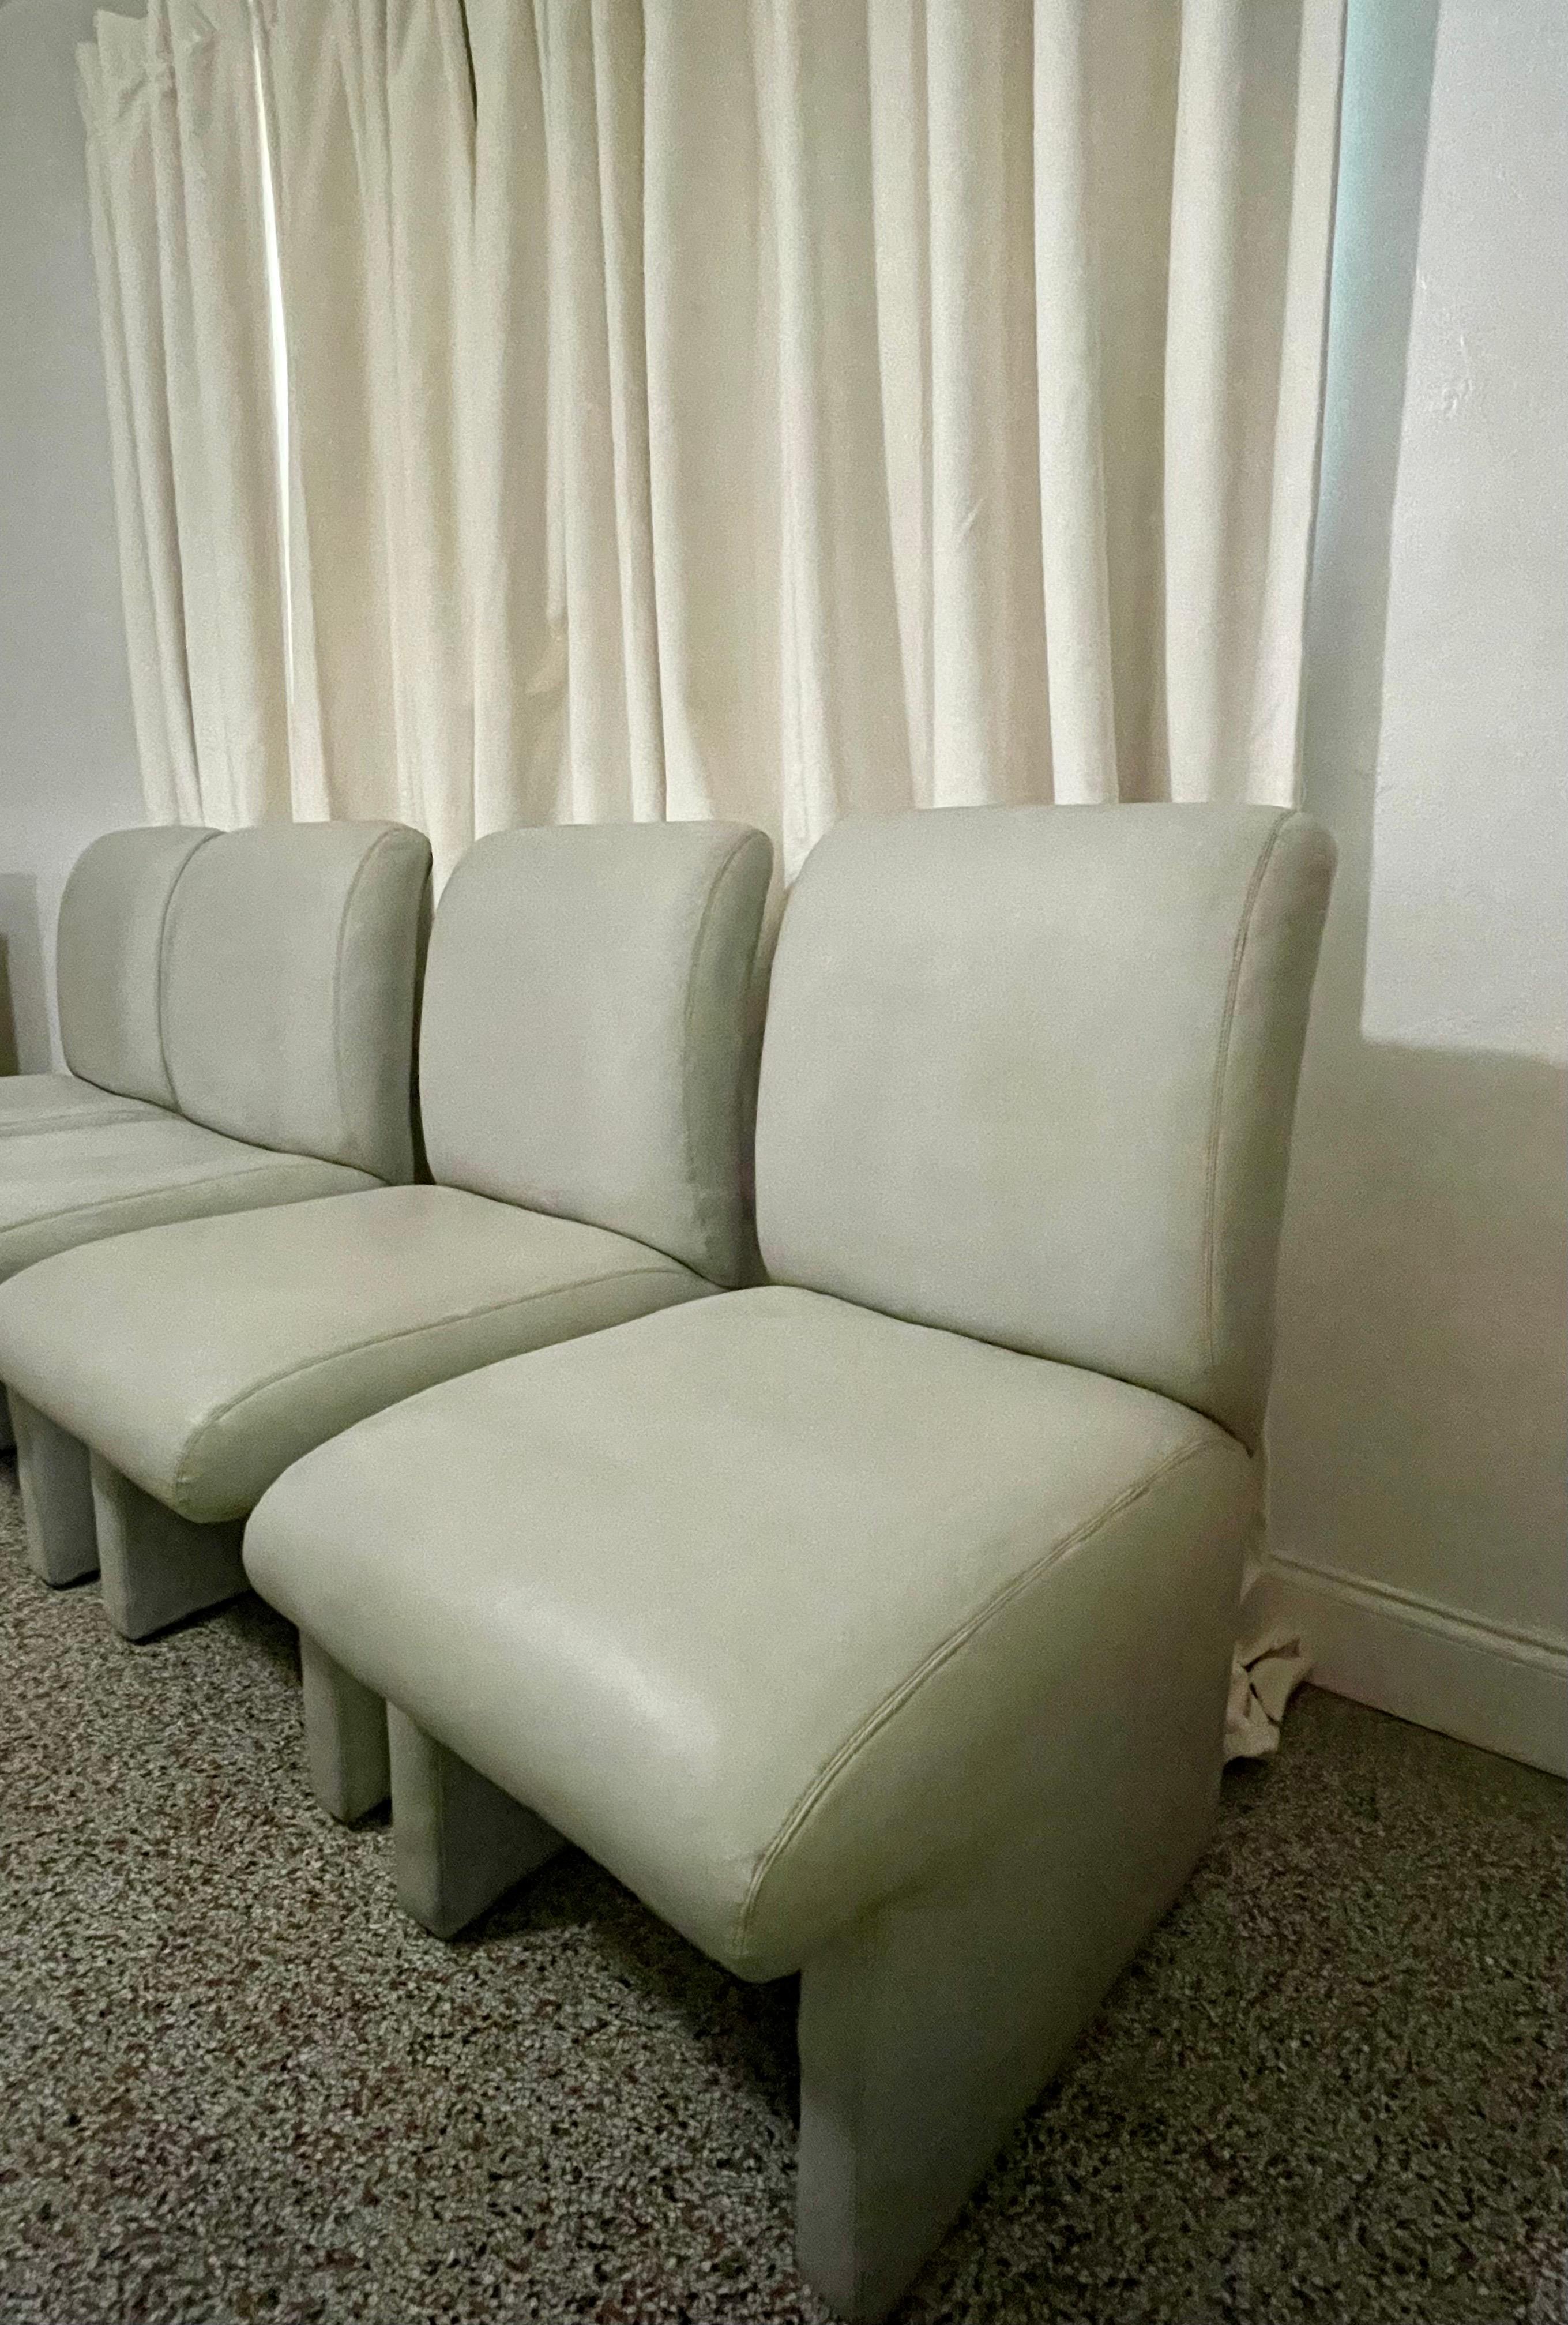 Late 20th Century Set of 4 Italian Post Modern Leather Dining Chairs In Good Condition For Sale In Hollywood, FL